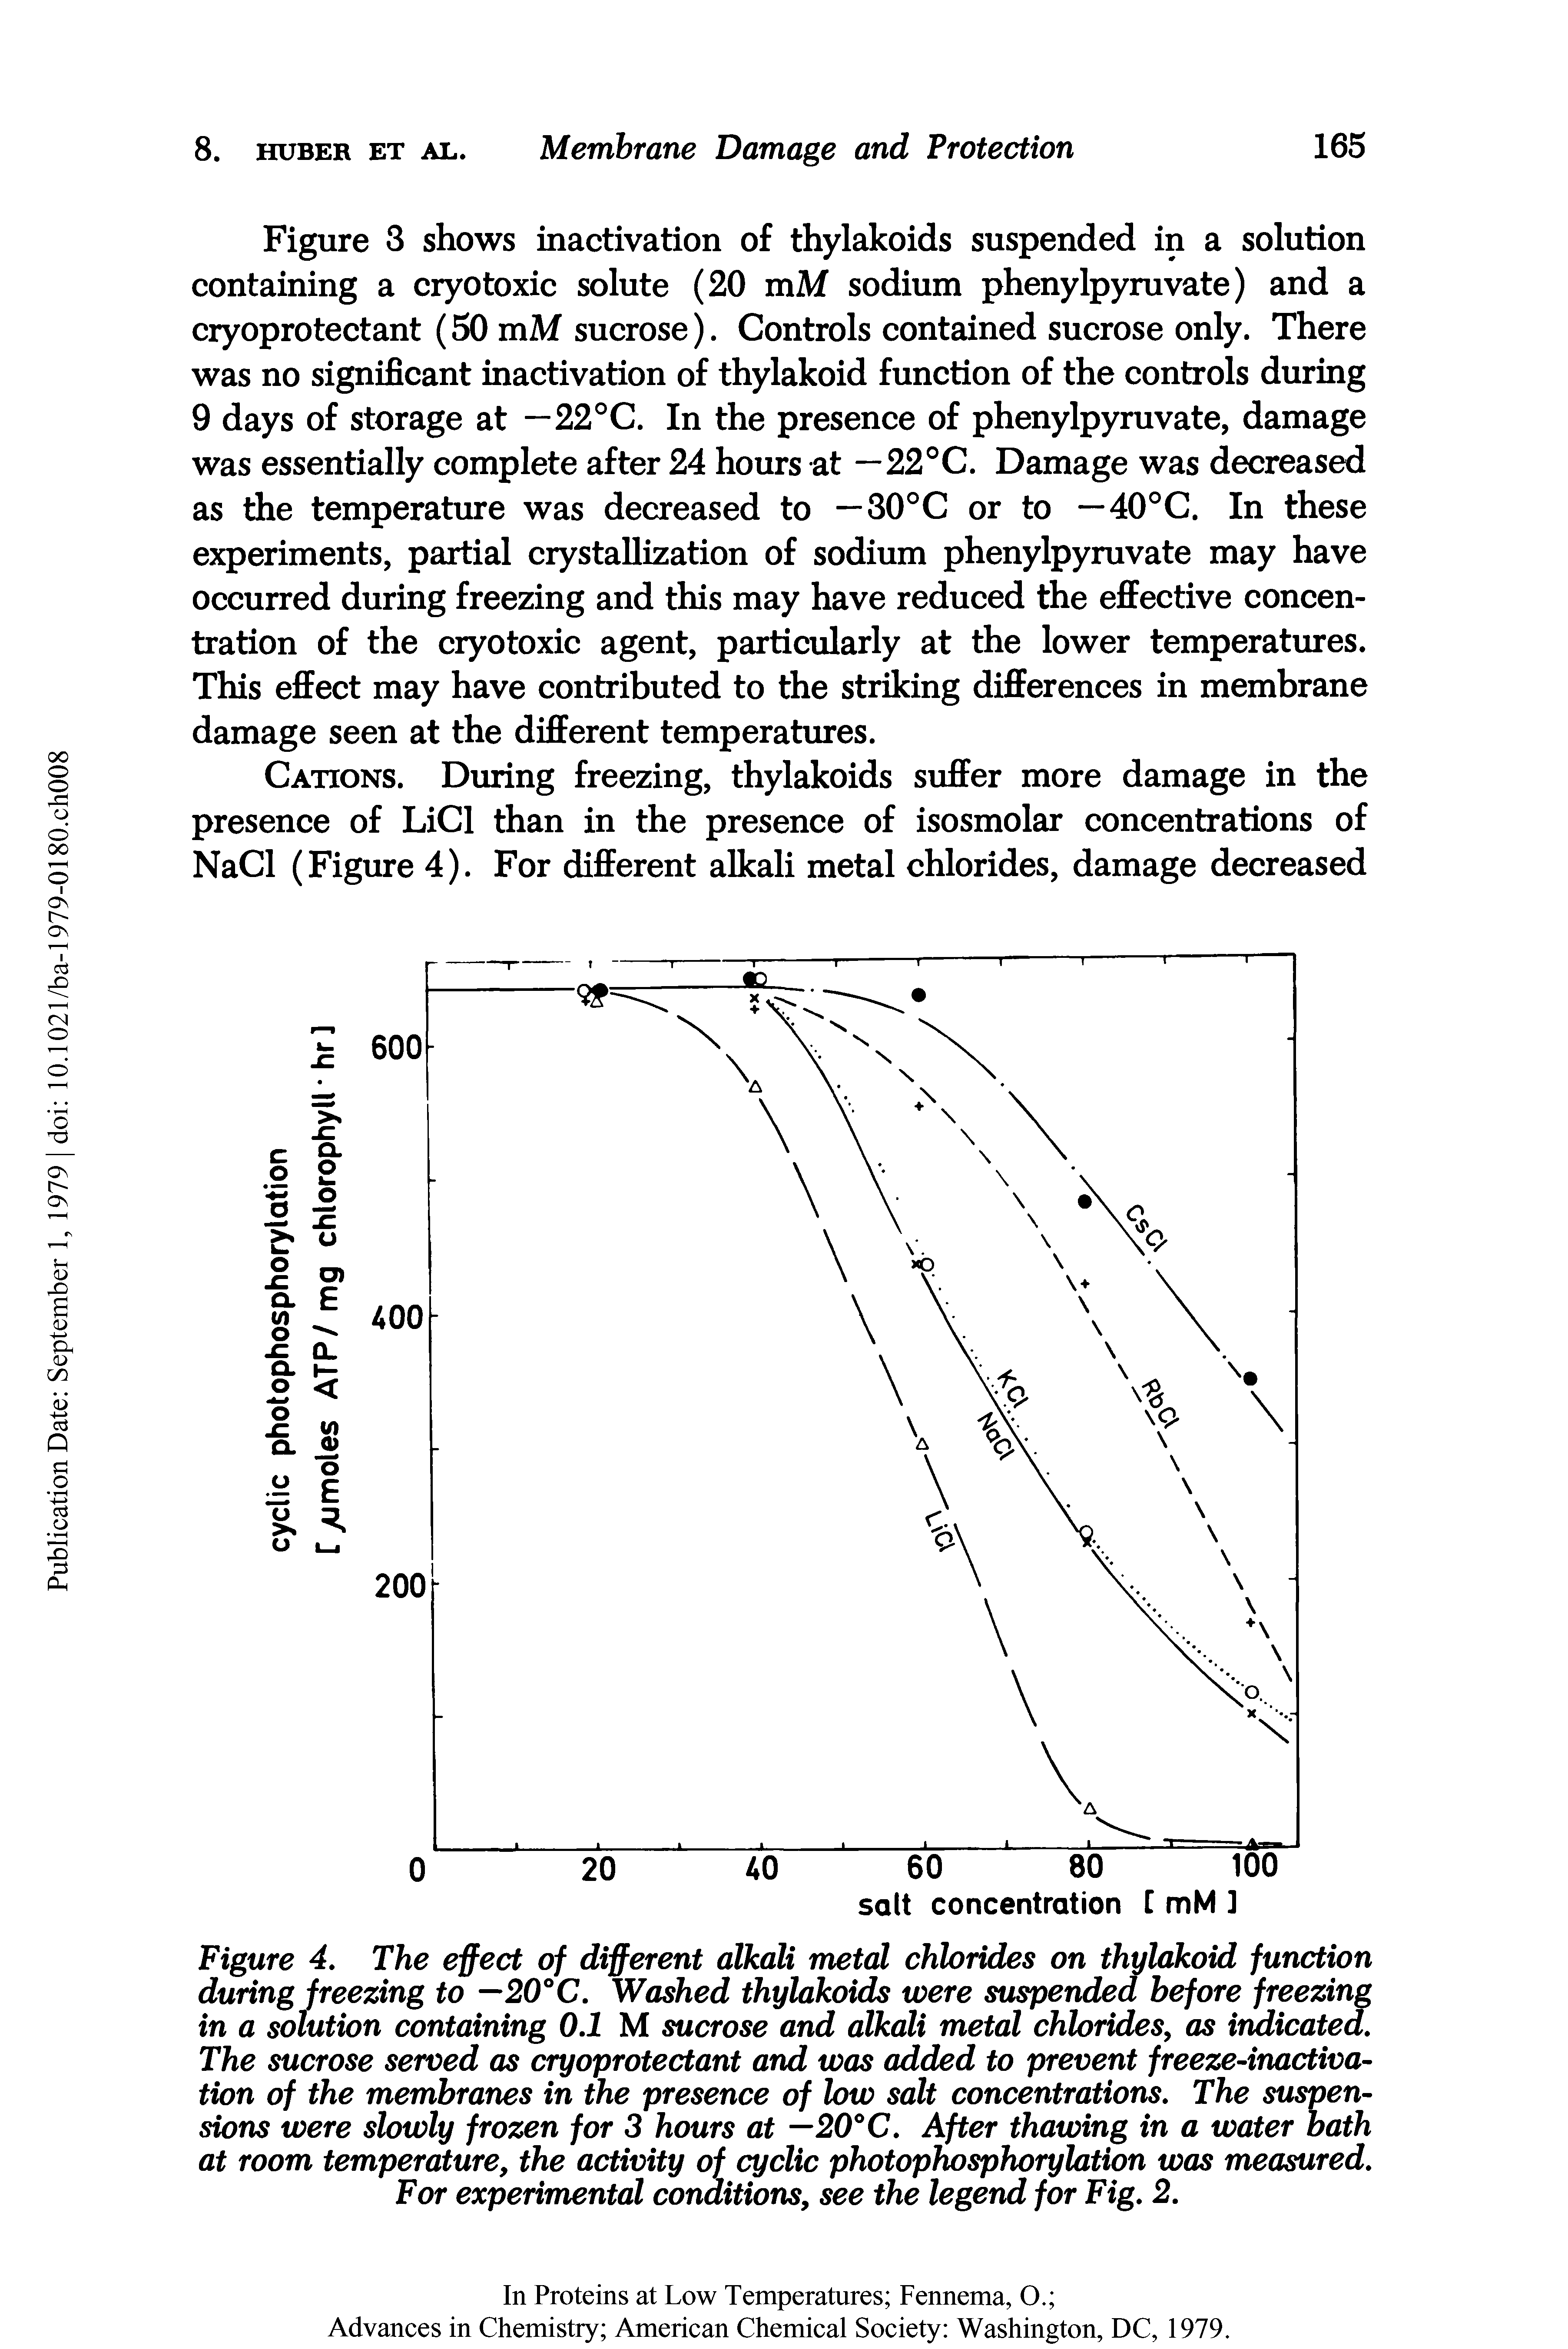 Figure 4. The effect of different alkali metal chlorides on thylakoid function during freezing to —20°C. Washed thylakoids were suspended before freezing in a solution containing 0.1 M sucrose and alkali metal chlorides, as indicated. The sucrose served as cryoprotectant and was added to prevent freeze-inactivation of the membranes in the presence of low salt concentrations. The suspensions were slowly frozen for 3 hours at —20°C. After thawing in a water bath at room temperature, the activity of cyclic photophosphorylation was measured.